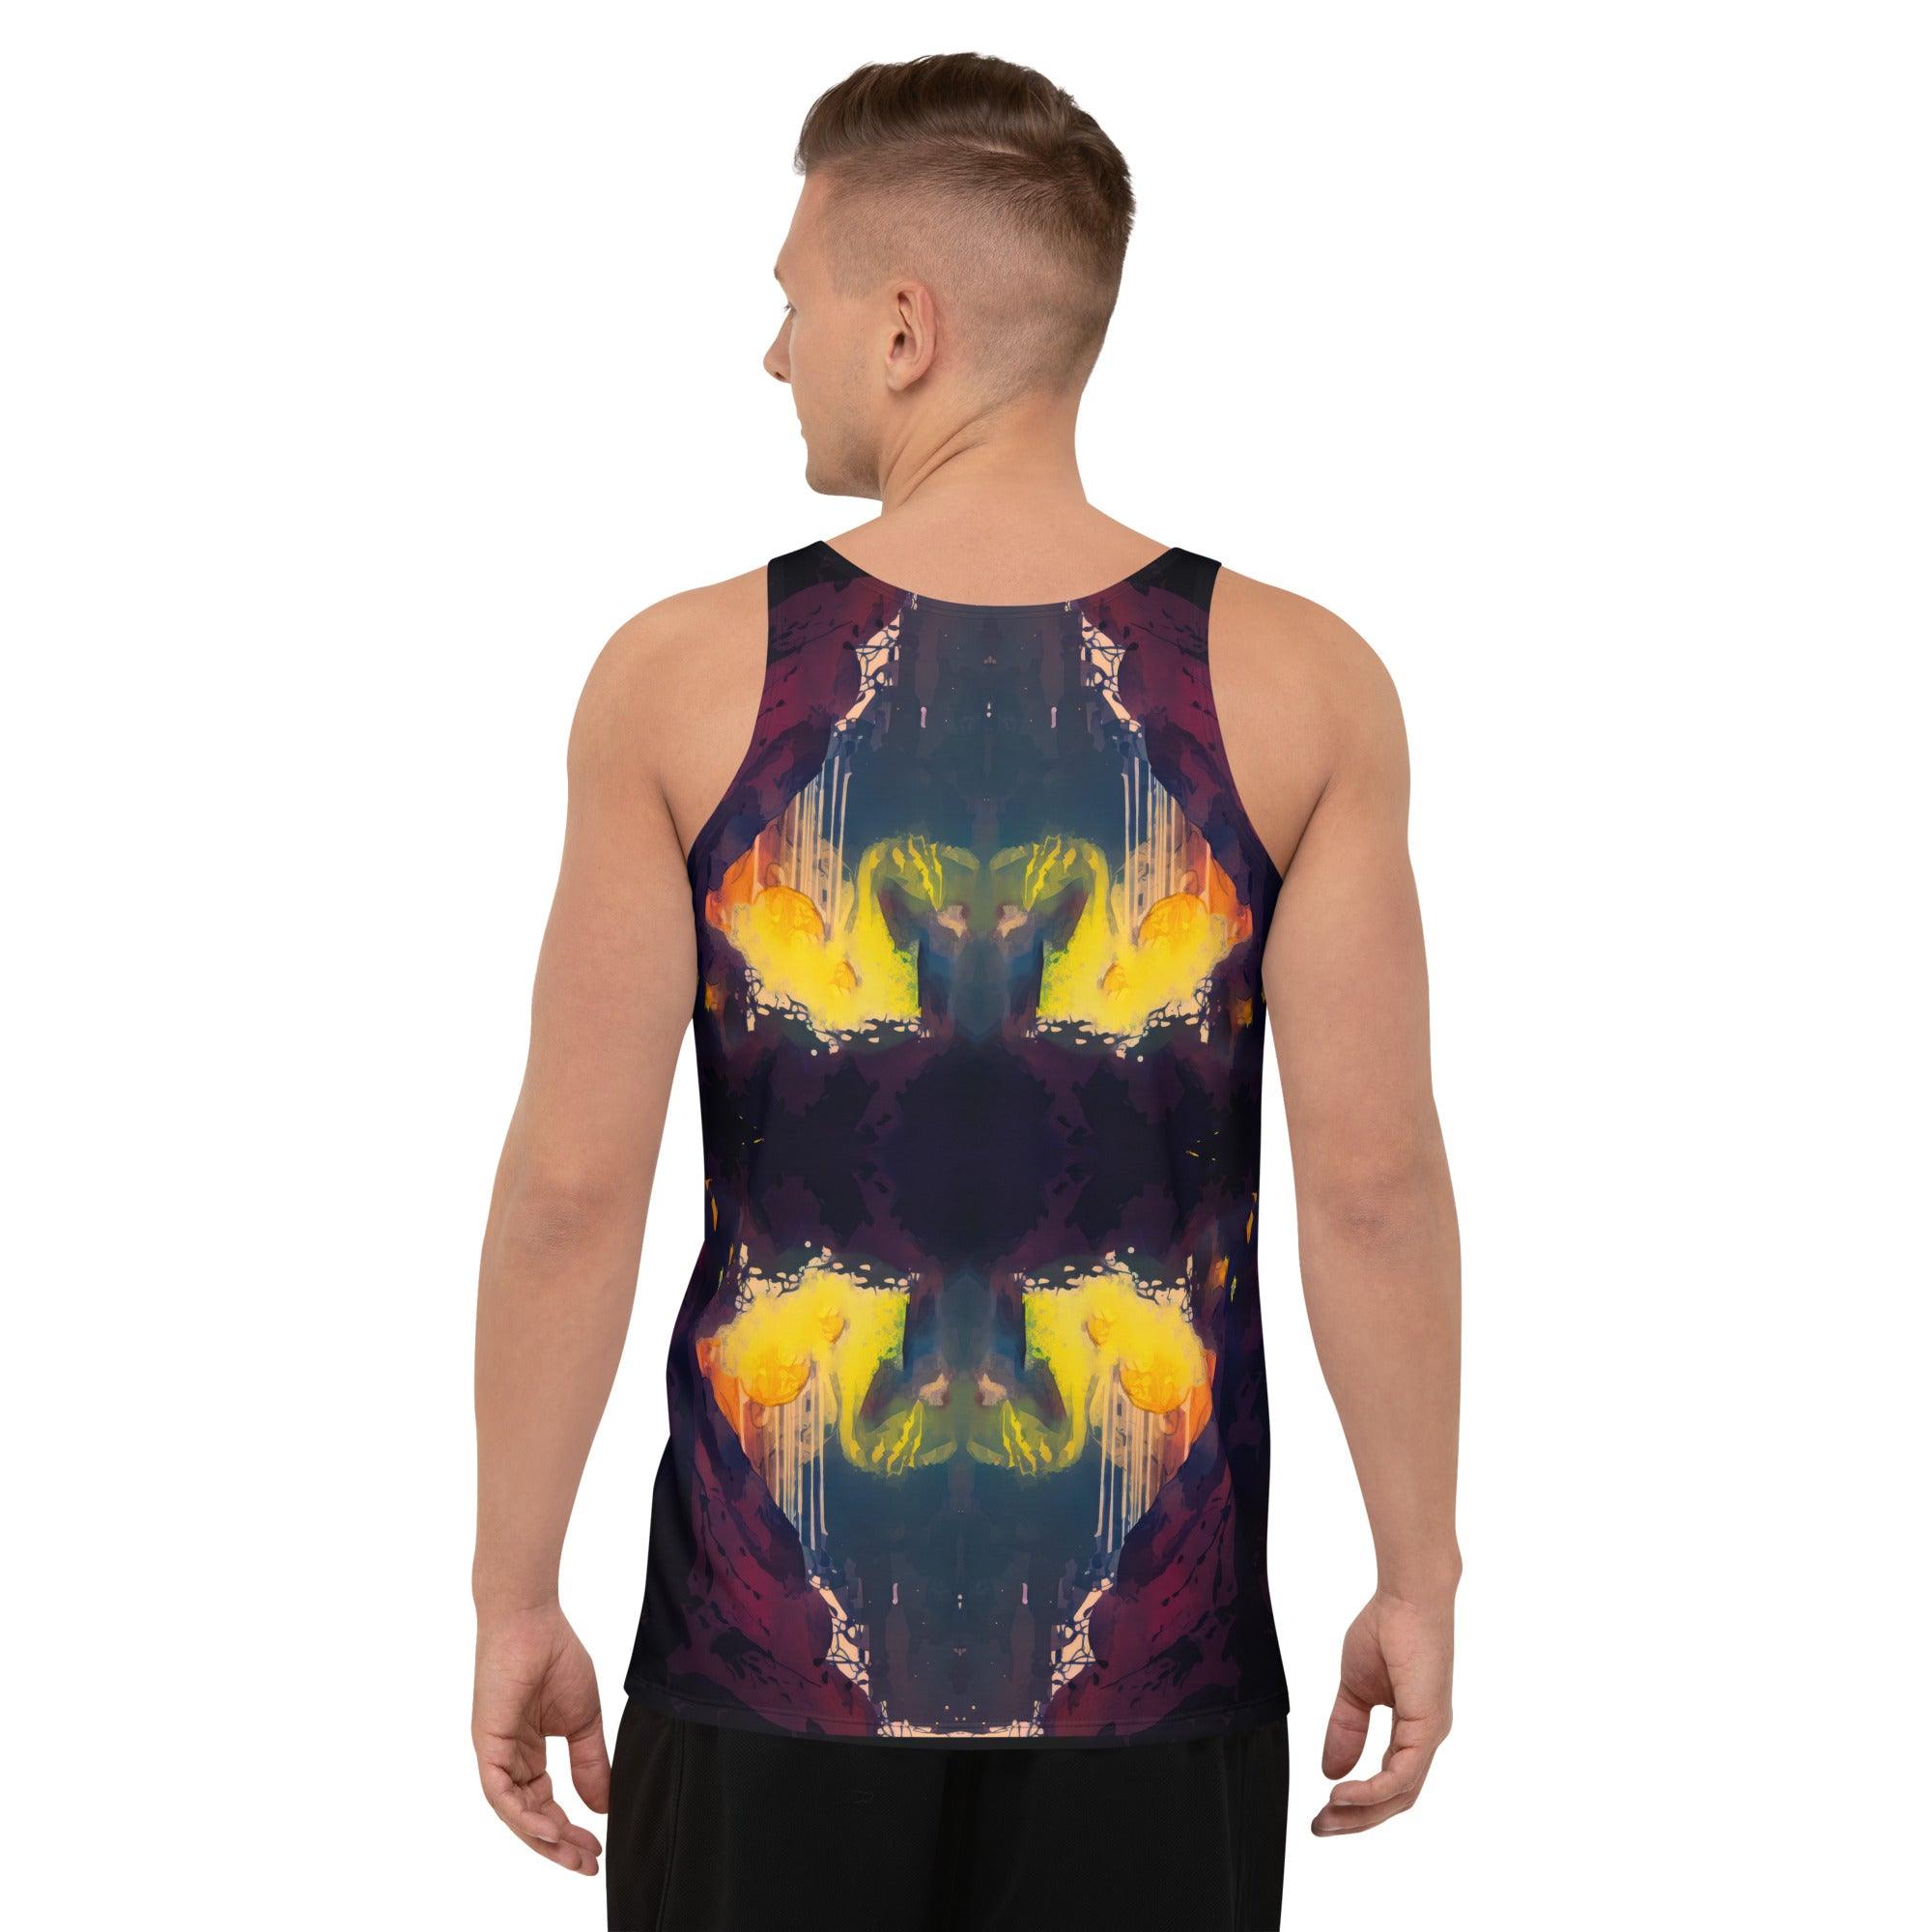 Back view of NS 849 Men's Tank Top worn by an athlete.